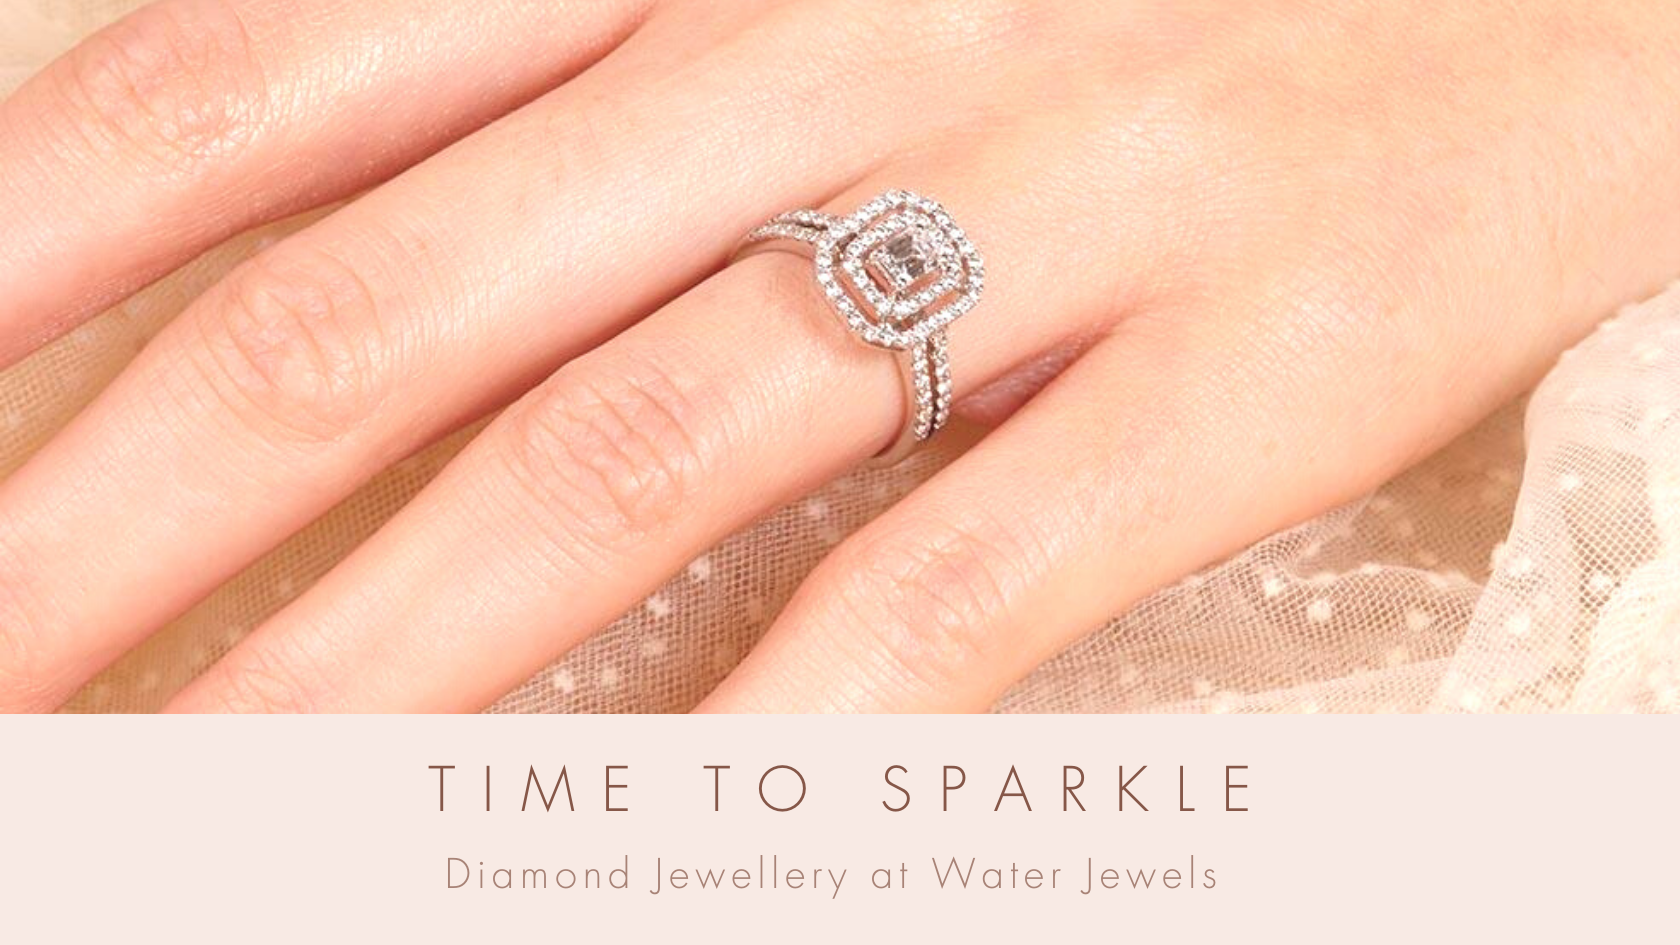 Time to Sparkle - Diamond Jewellery at Water Jewels